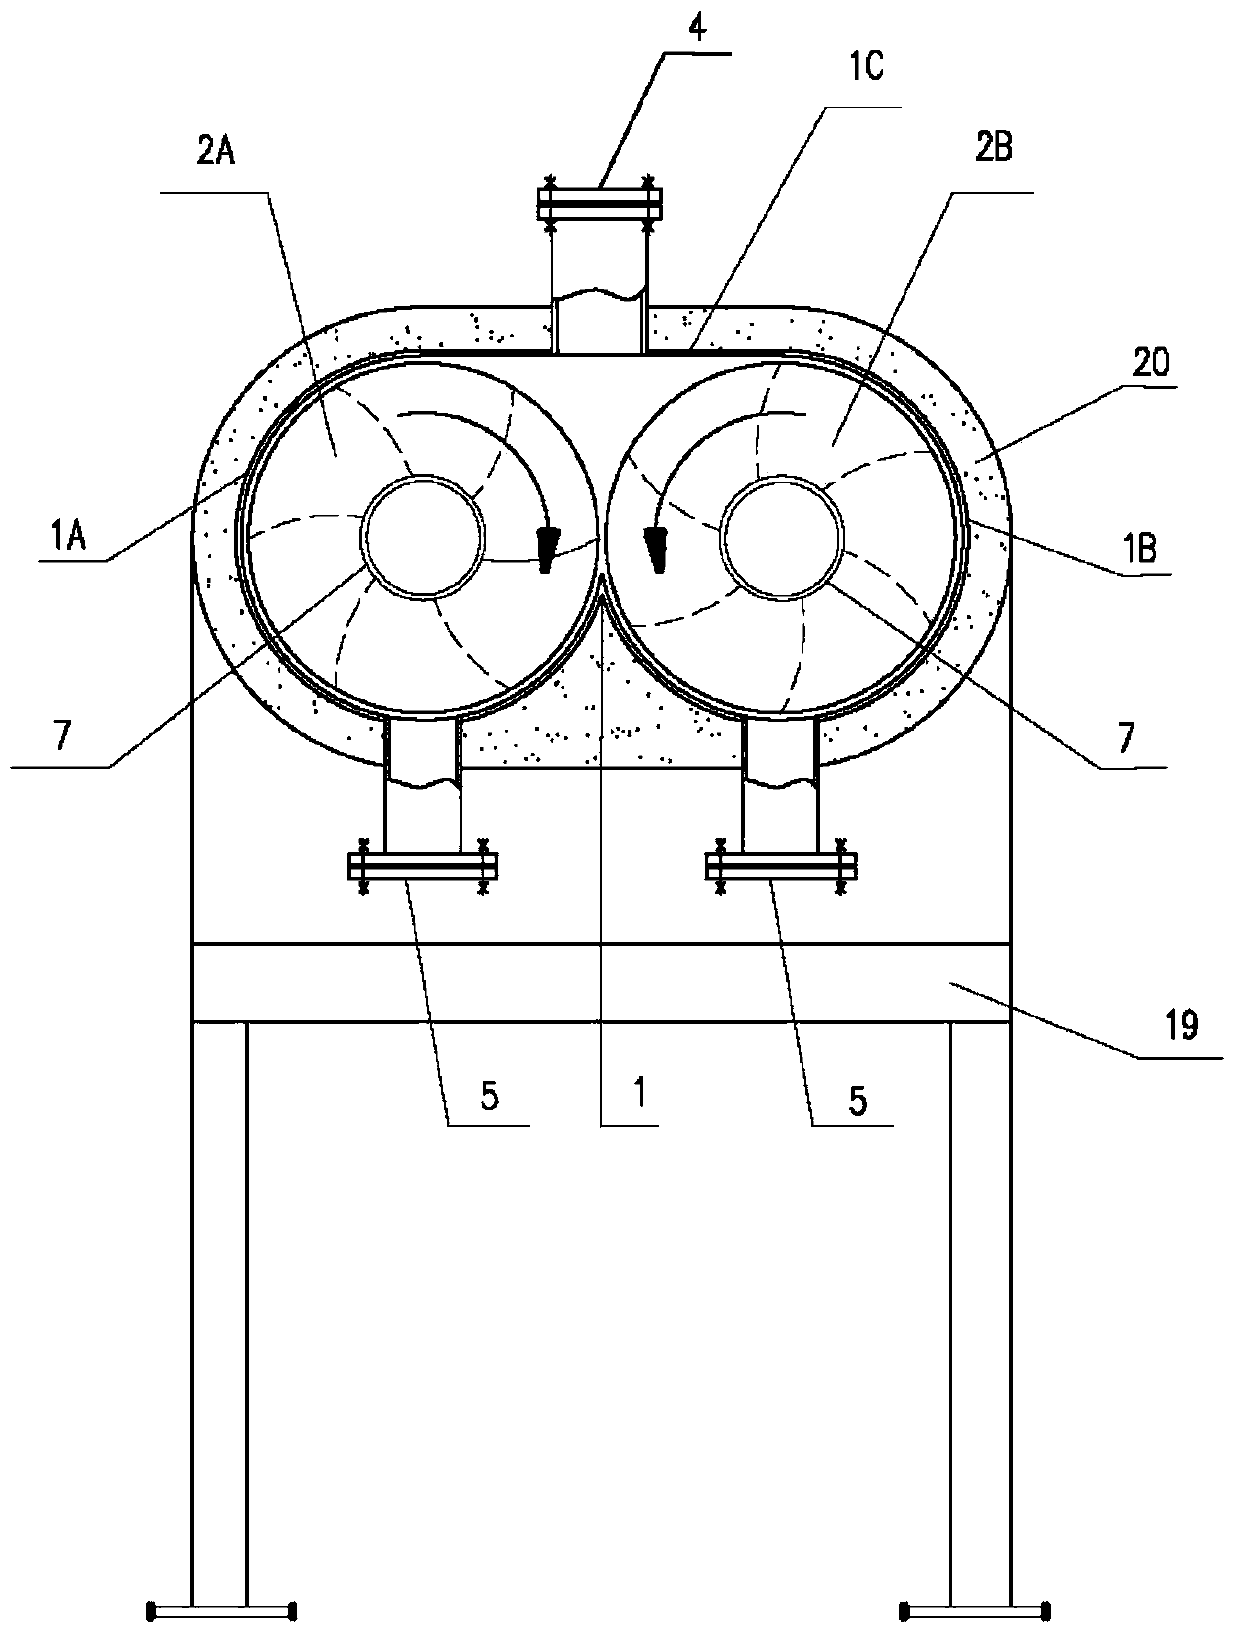 Continuous internal heating double-barrel pyrolysis furnace for solid organic matter